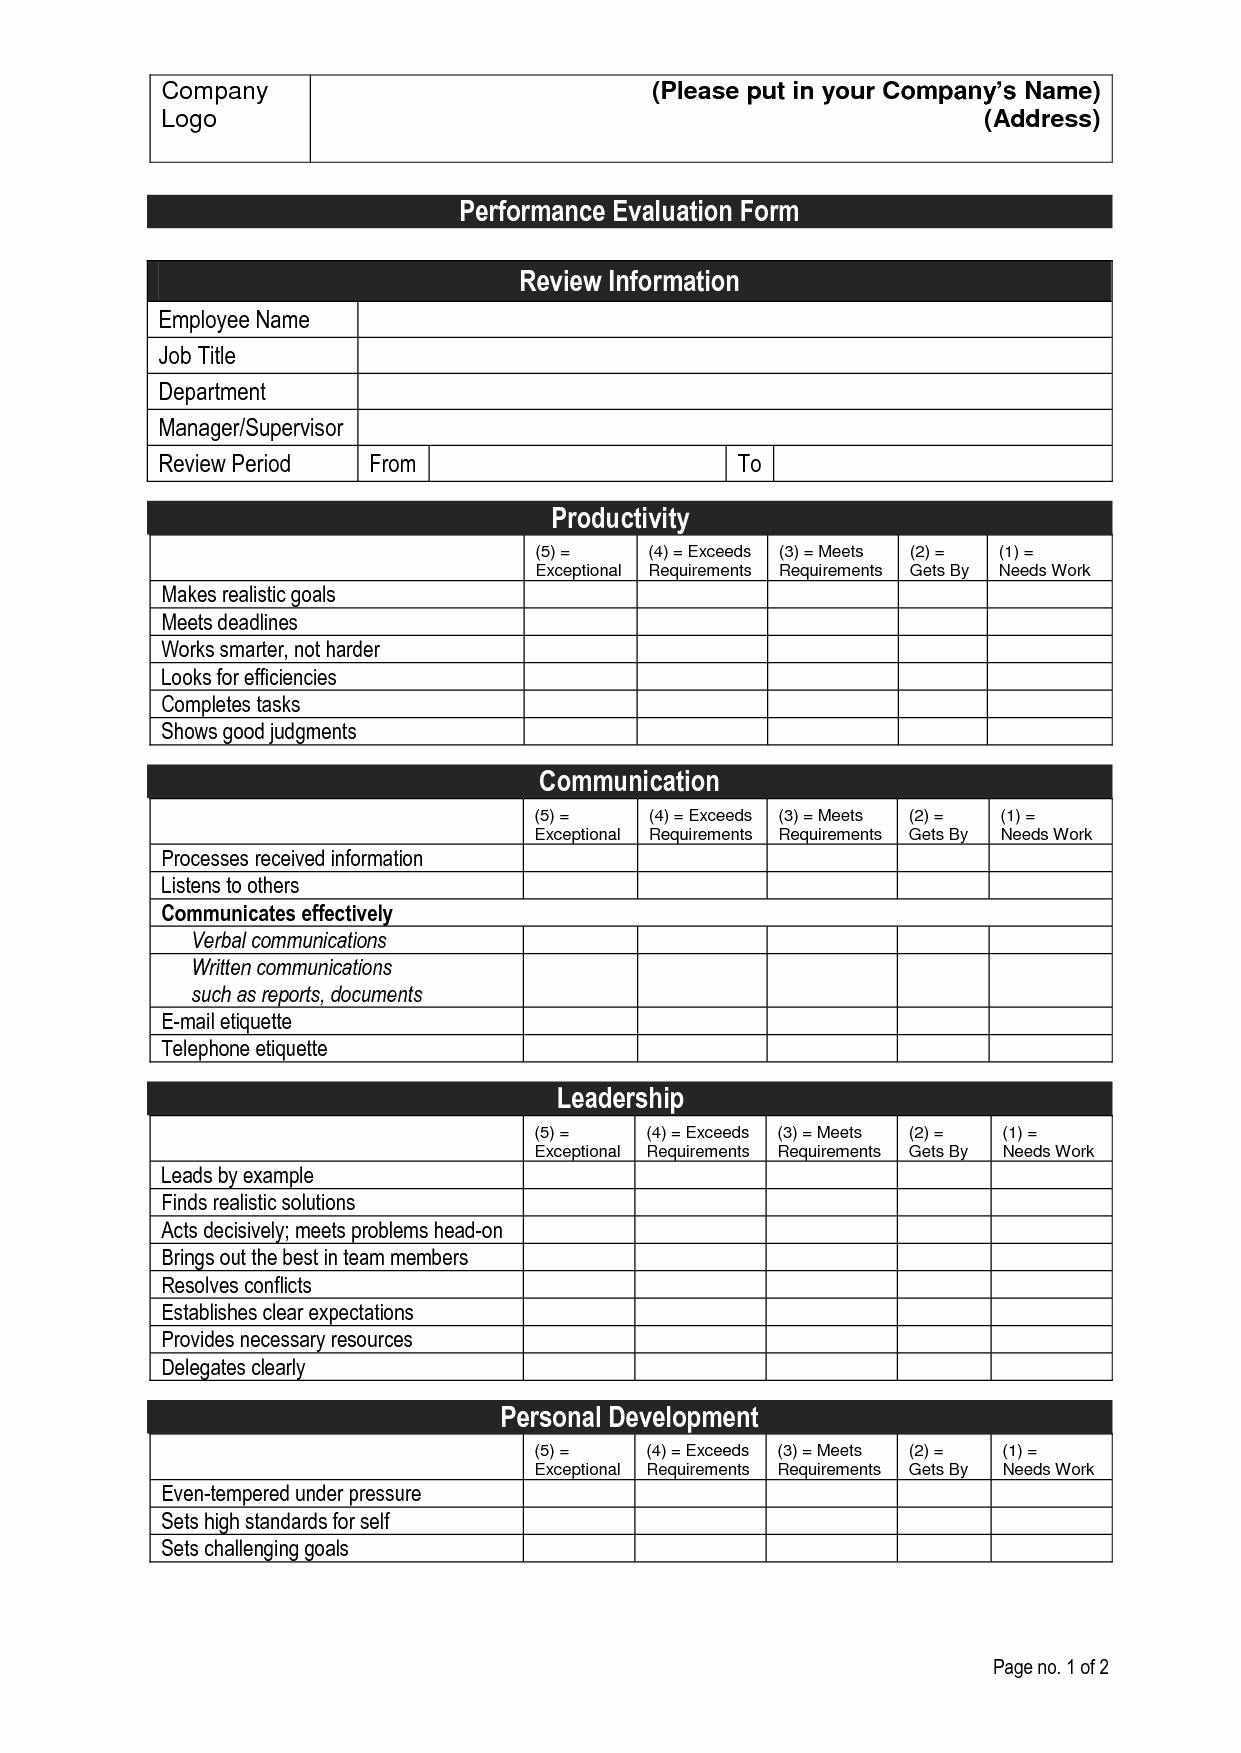 Employee Performance Evaluation Template Inspirational Employee Performance Review Template